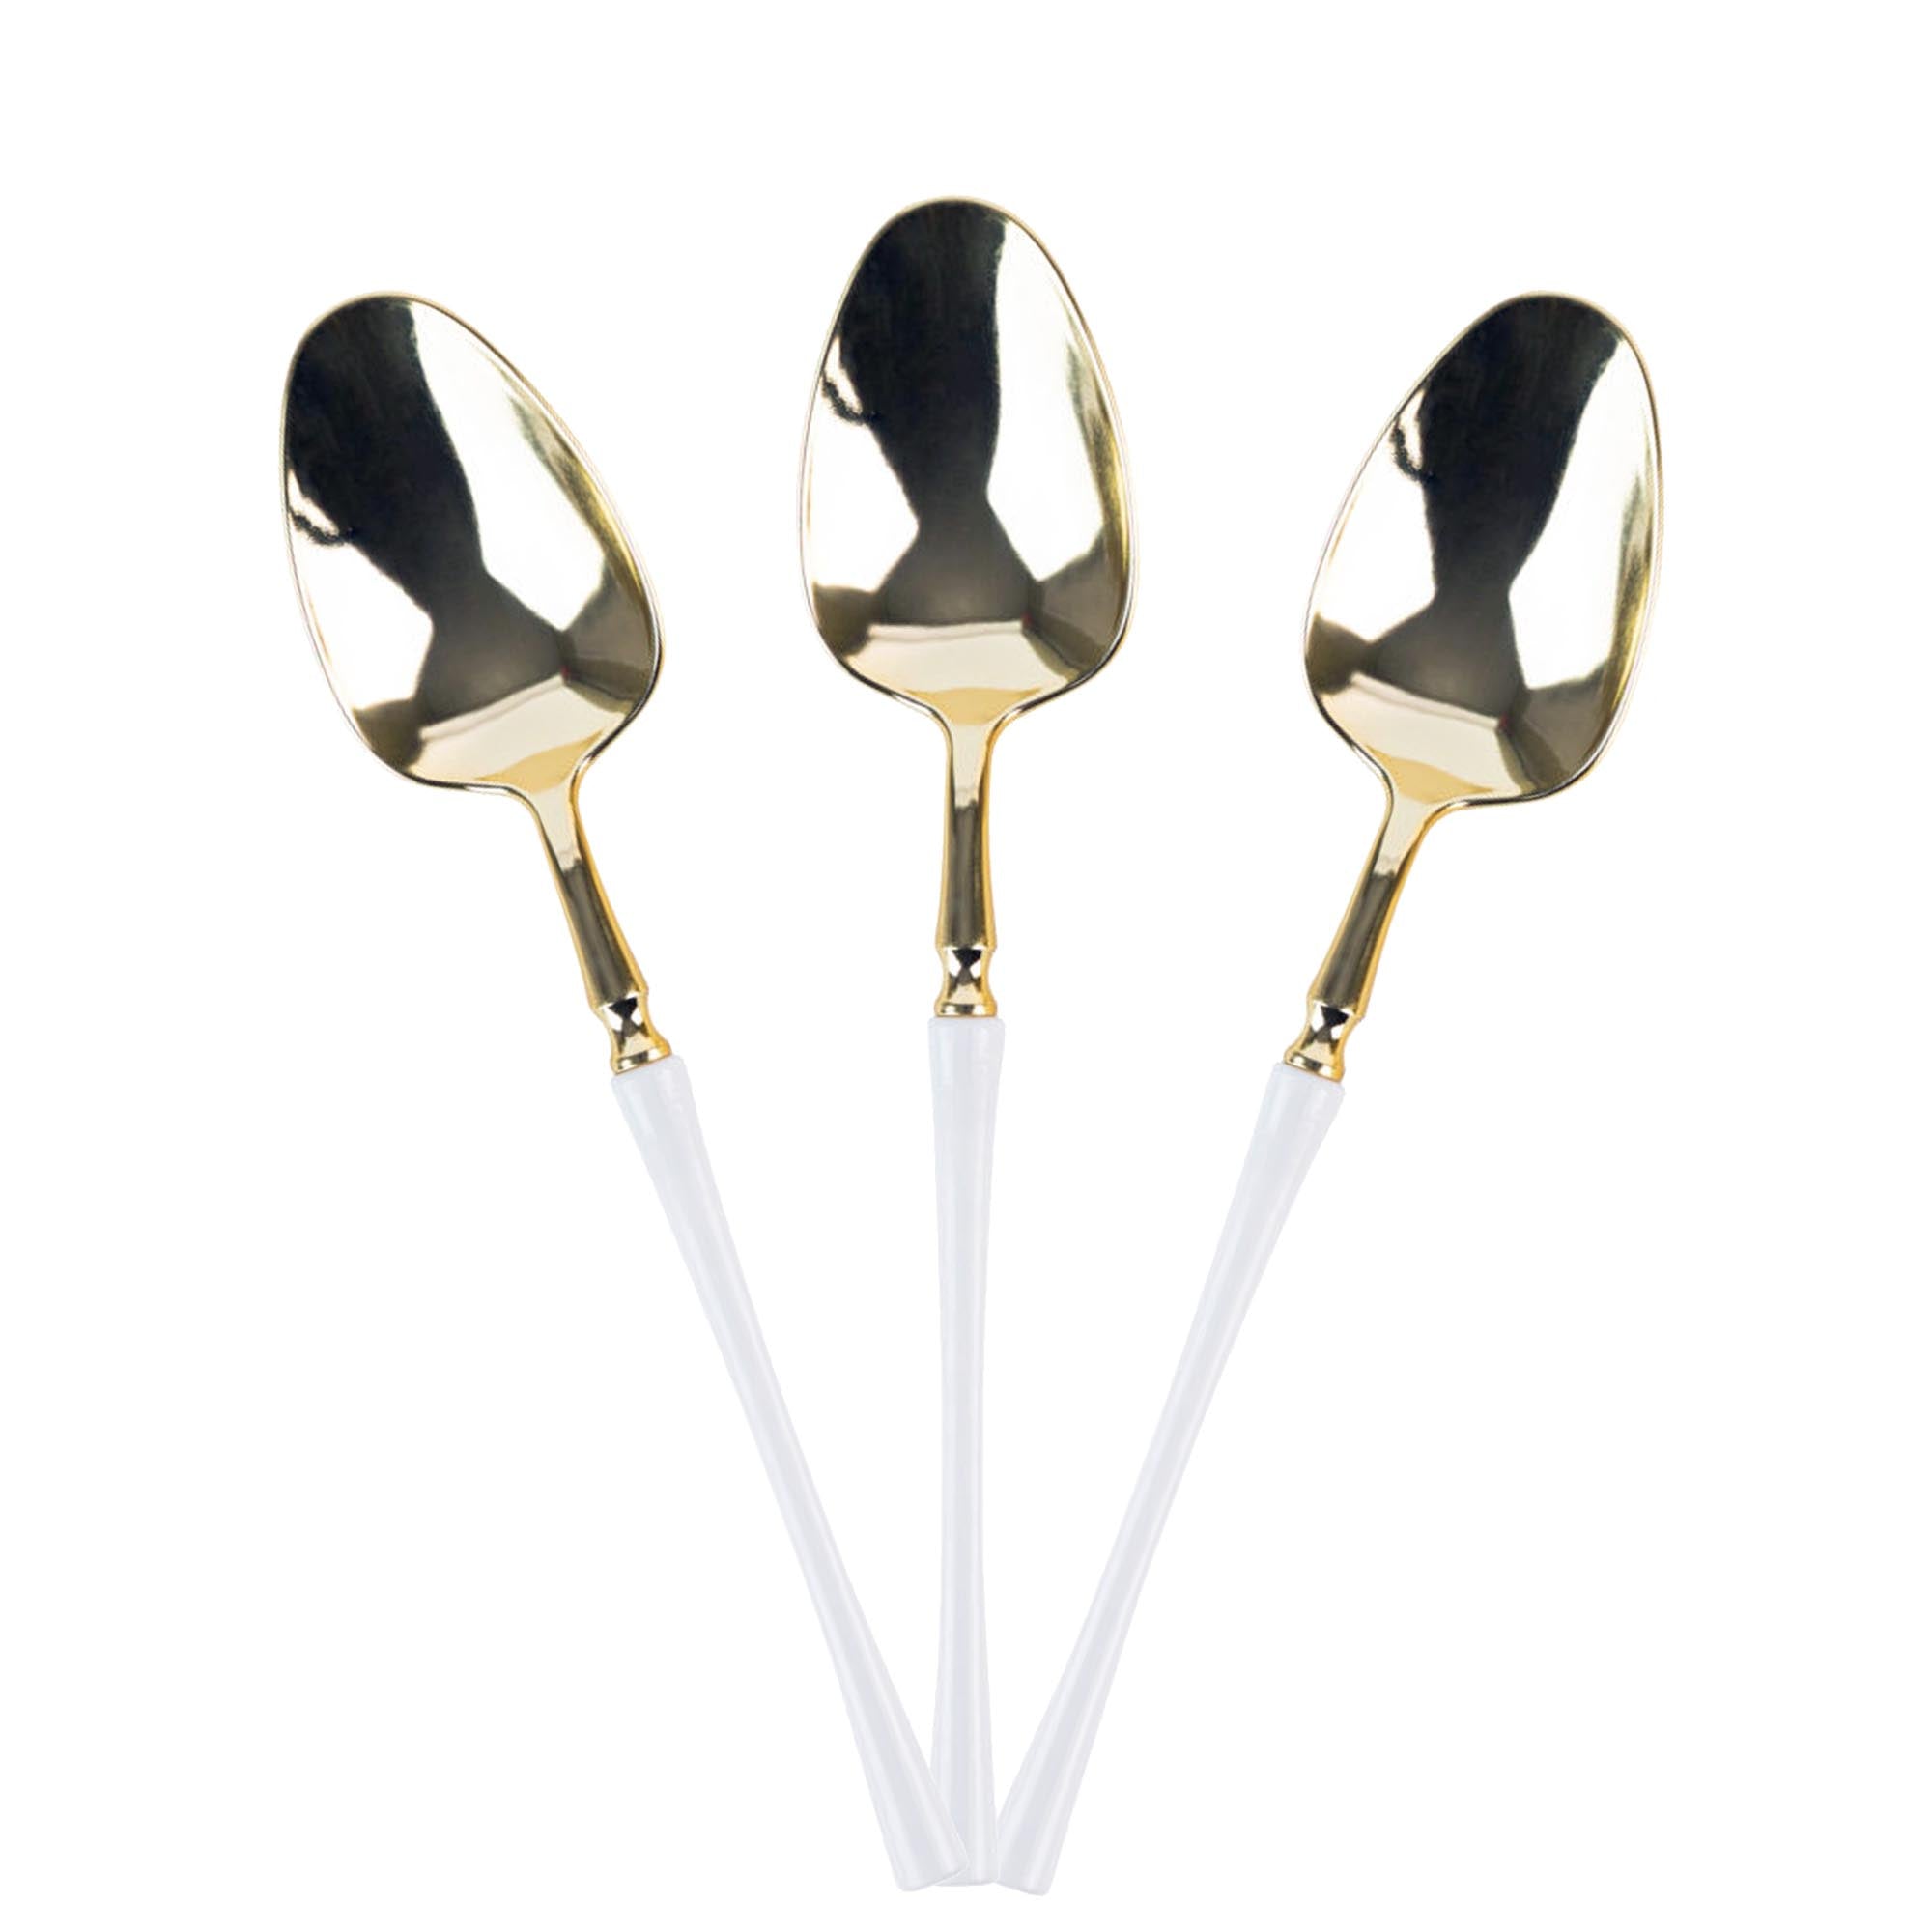 Plastic White and Gold Infinity Flatware Collection